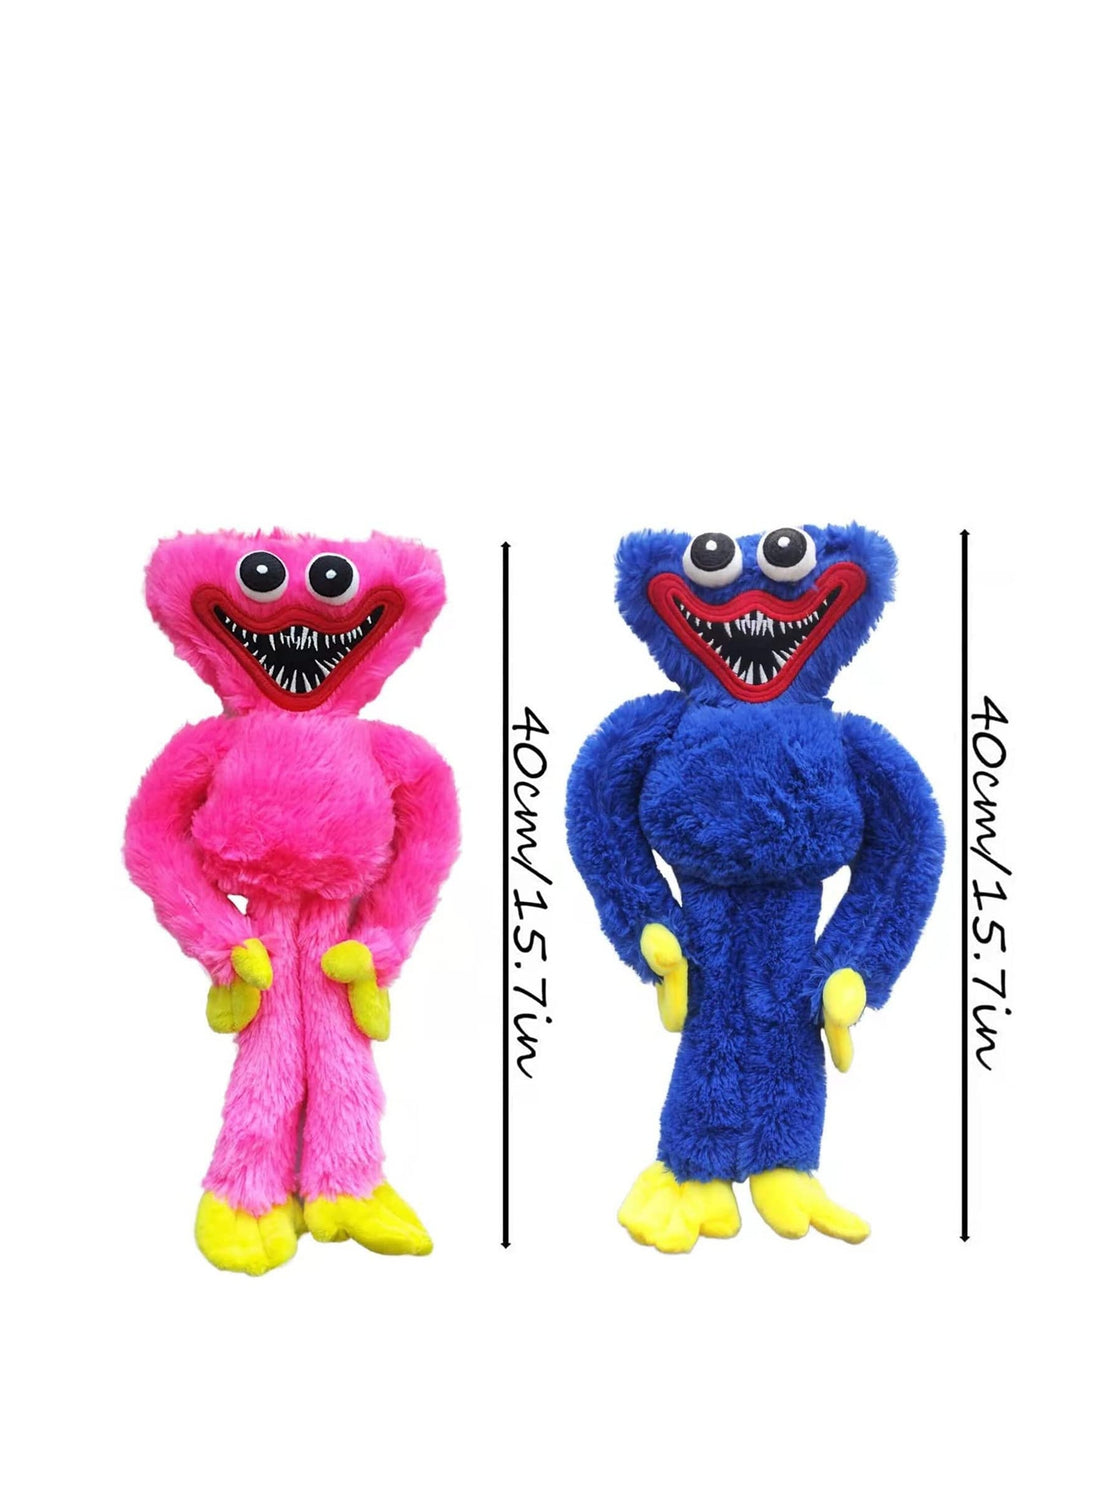 Huggy Wuggy Game Cartoon Character Plush Toy Blue and Pink